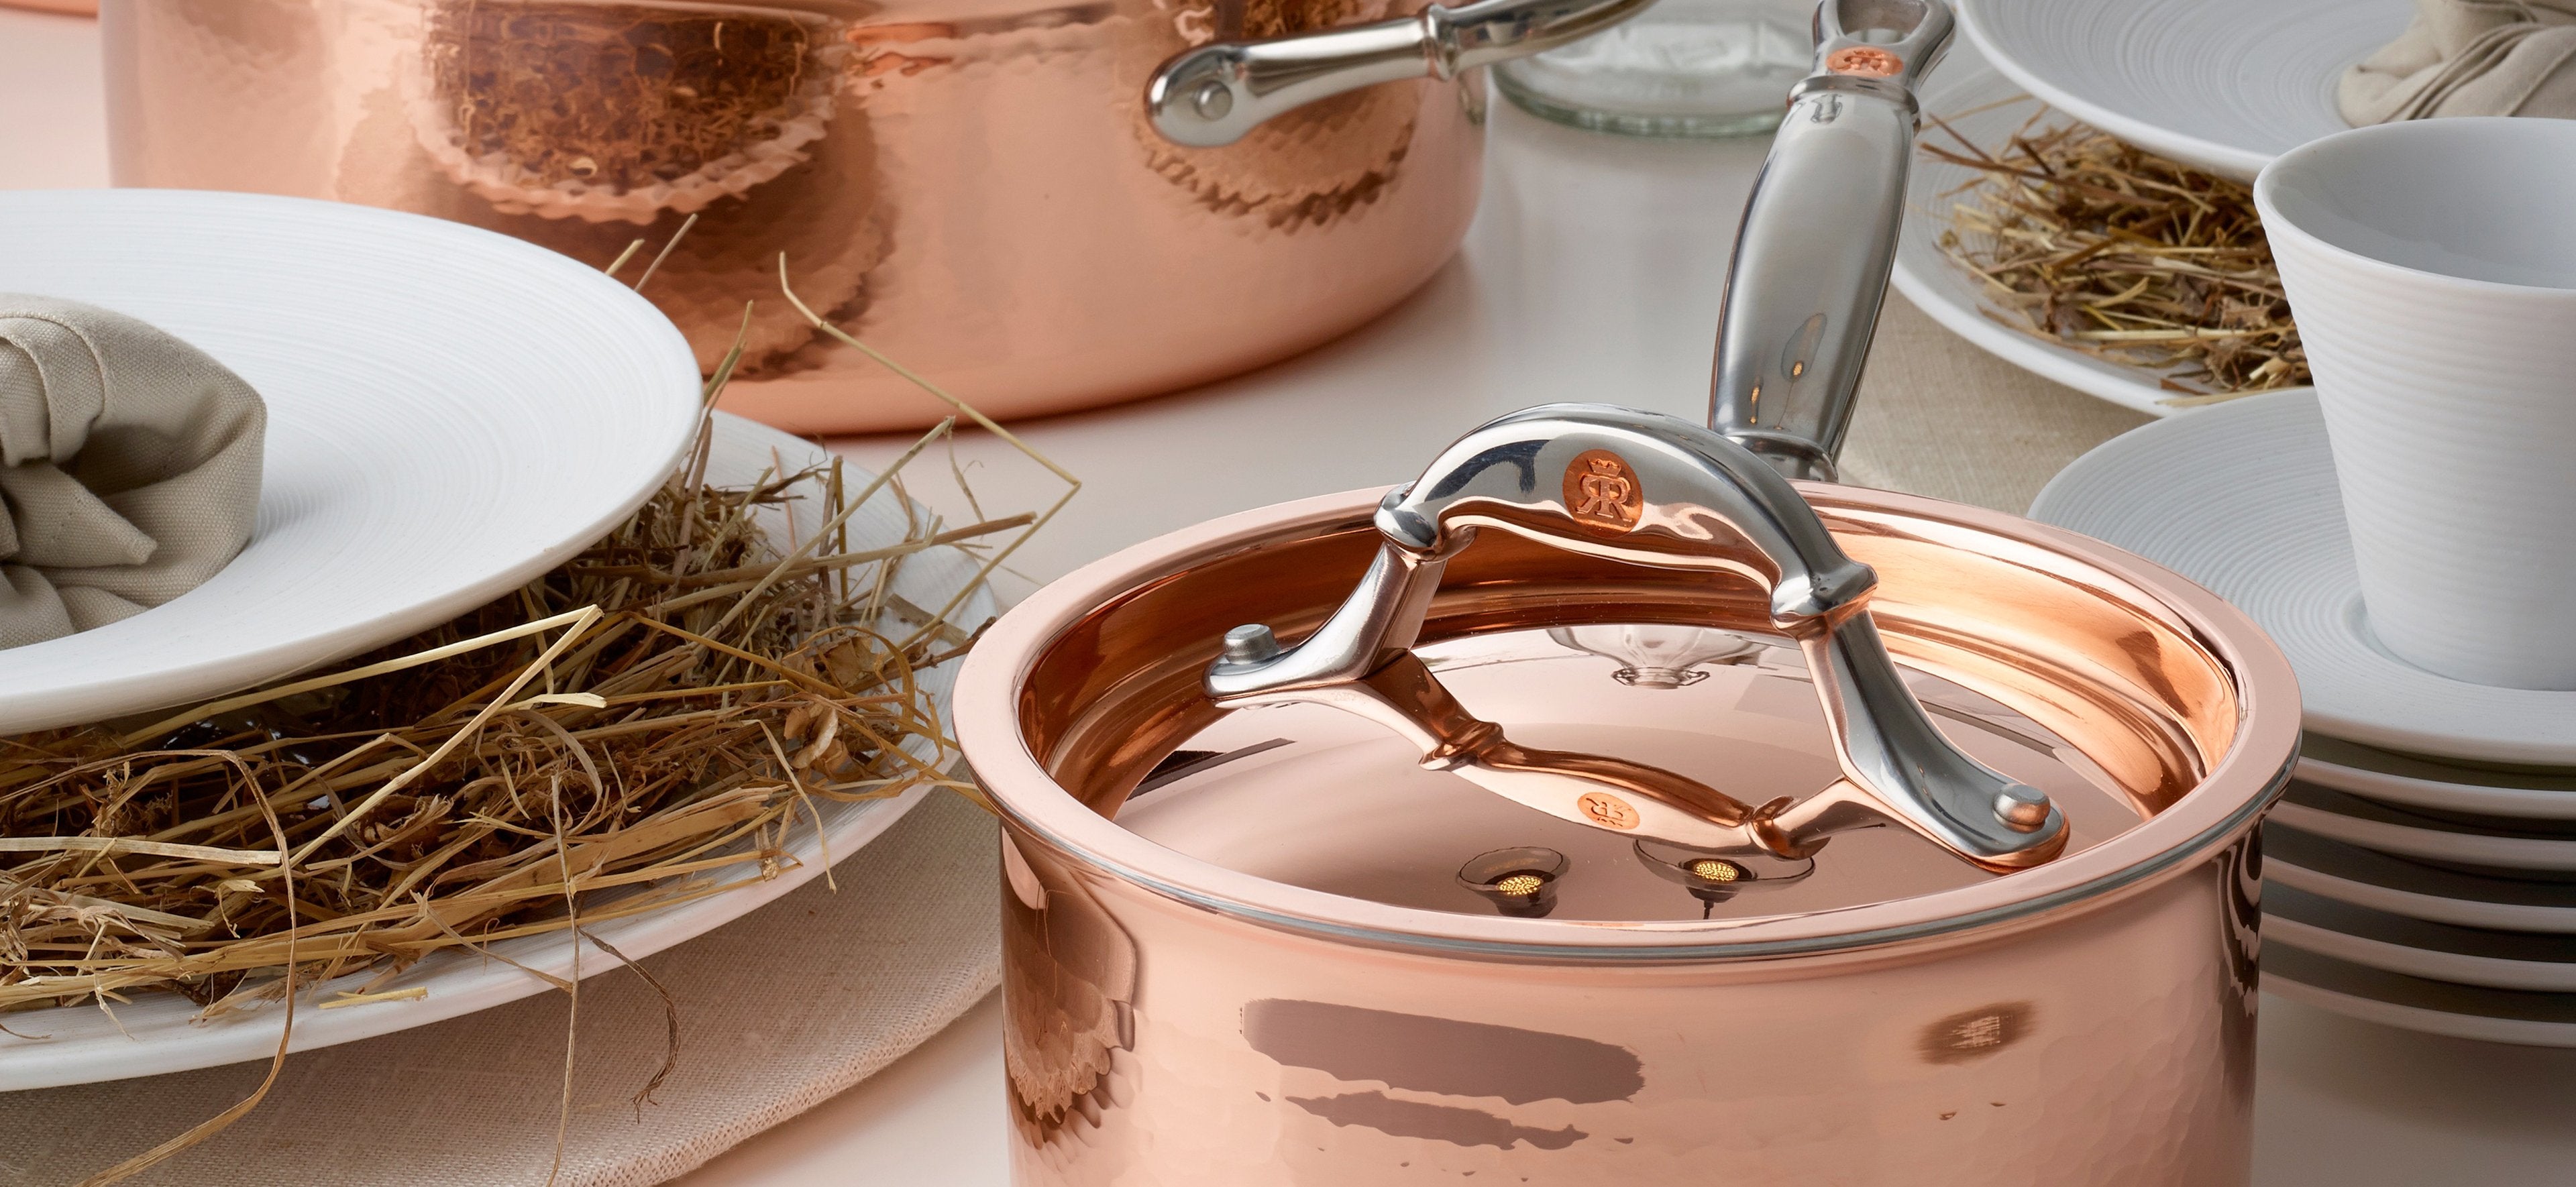 Copper with Stainless Steel – Ruffoni US